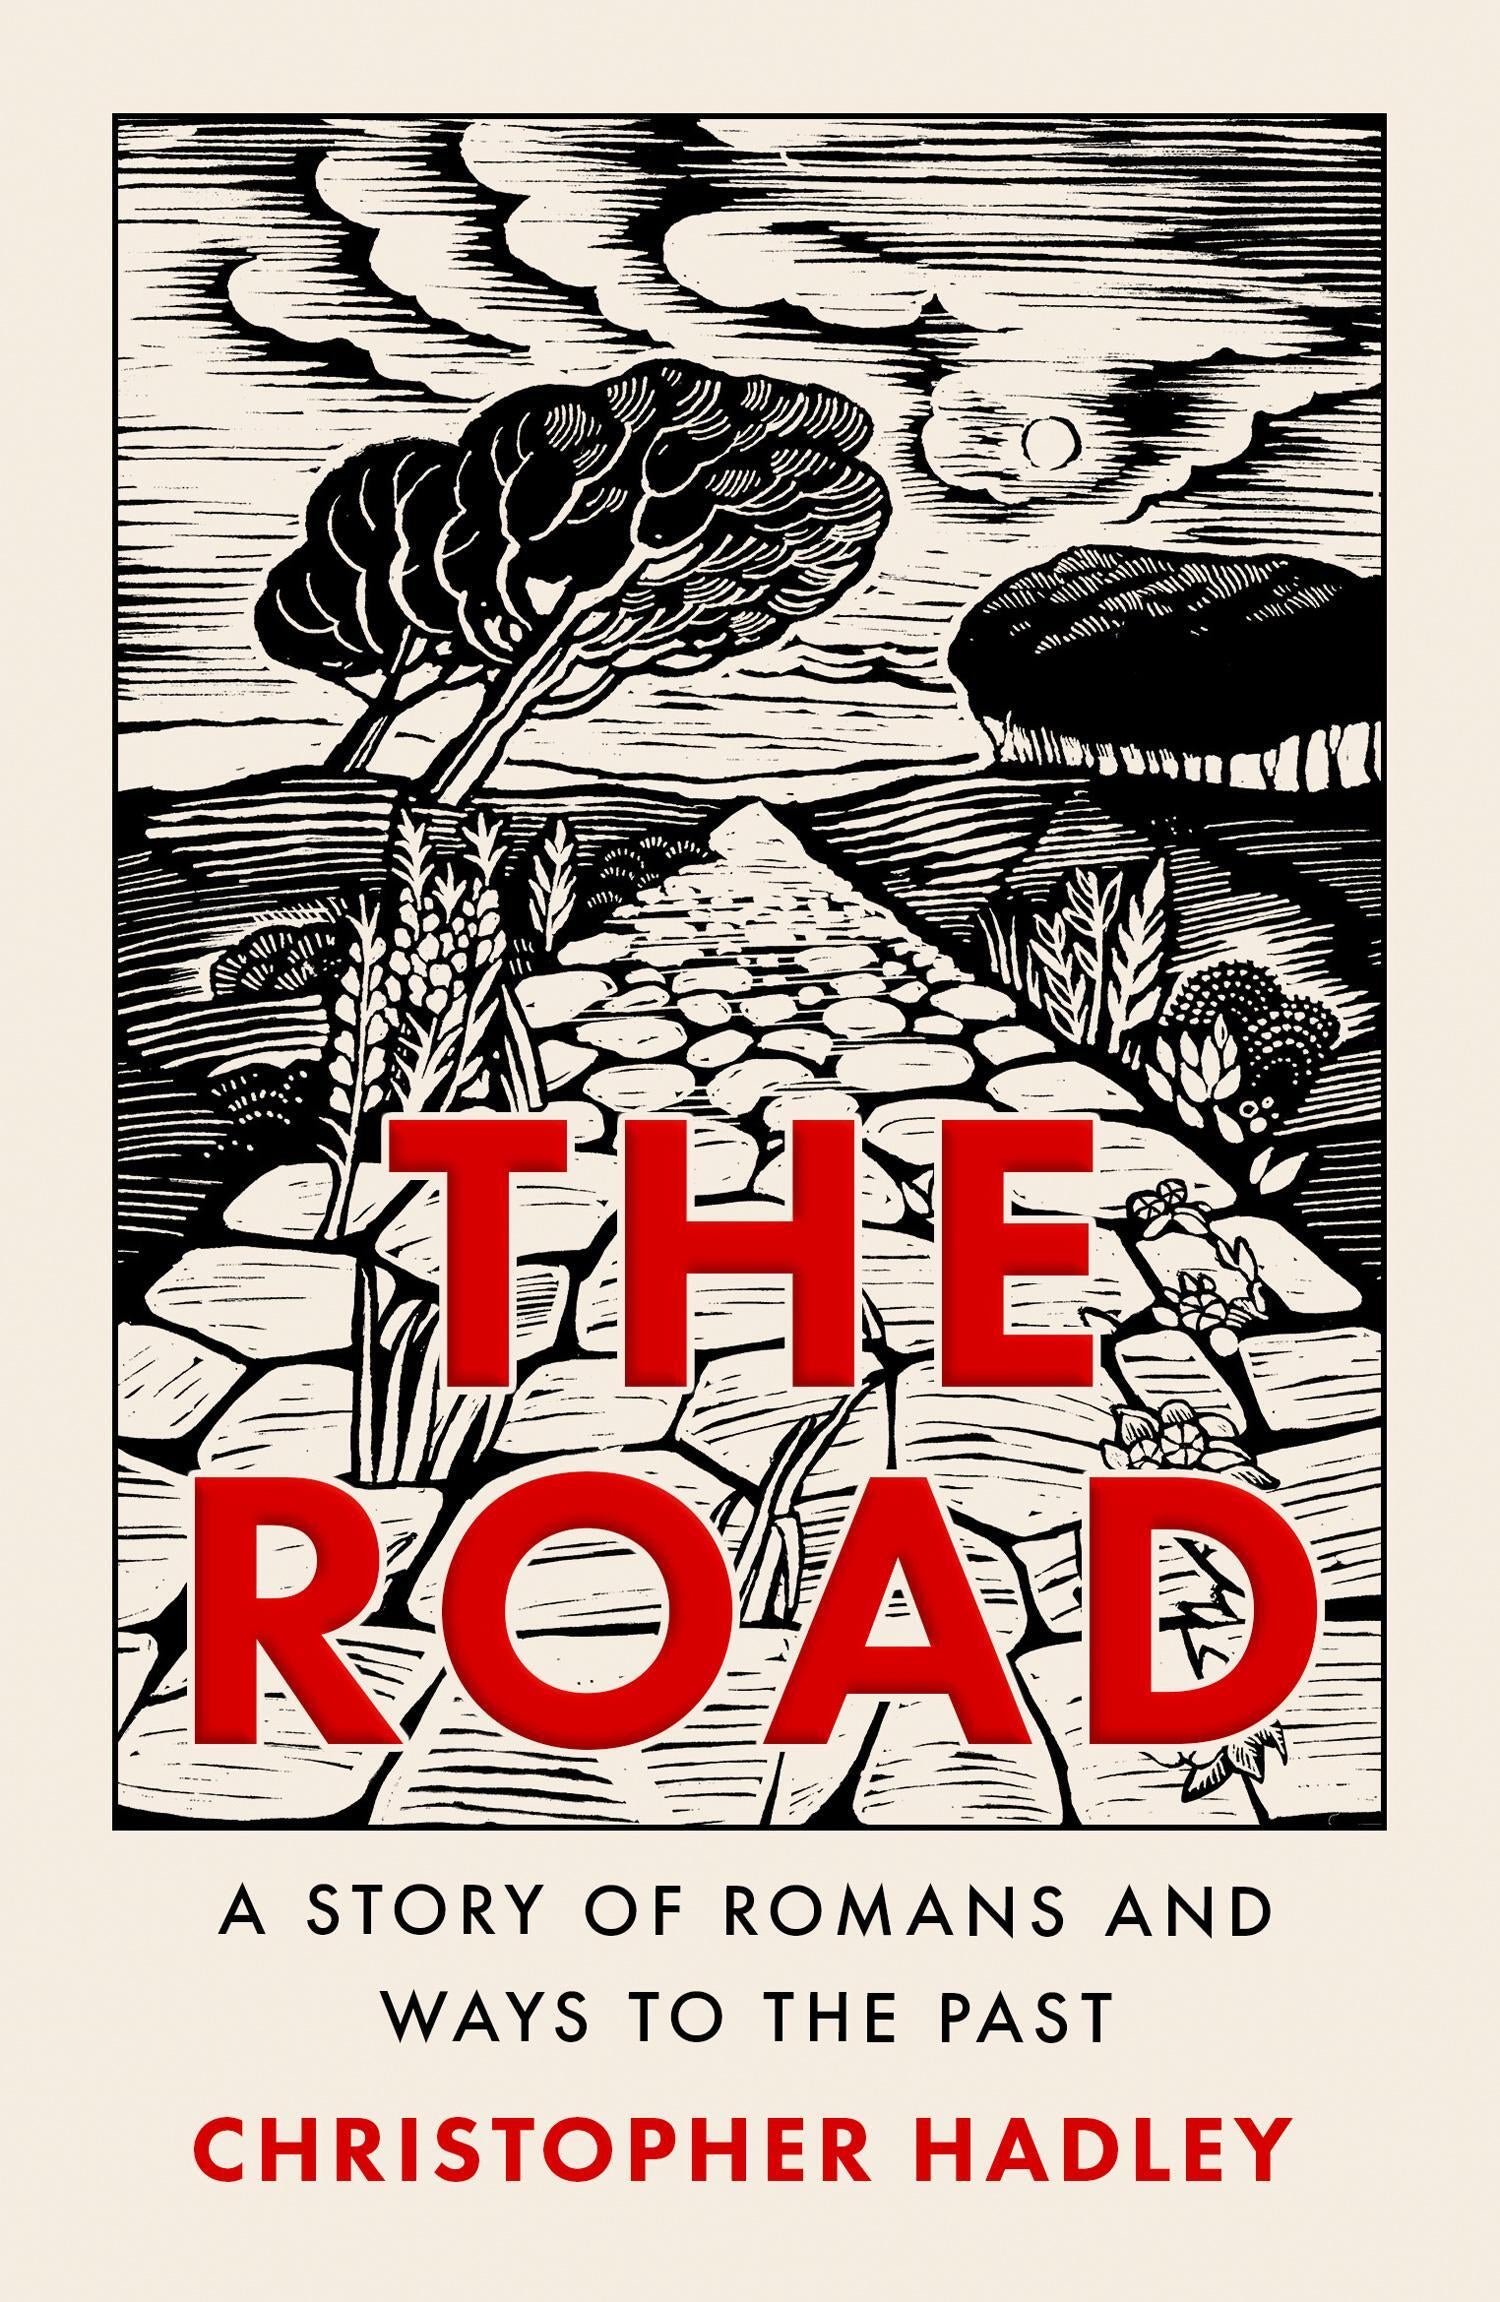 The history of Roman roads in Britain begins with the history of the Roman occupation, starting at a beachhead on the Kent coast